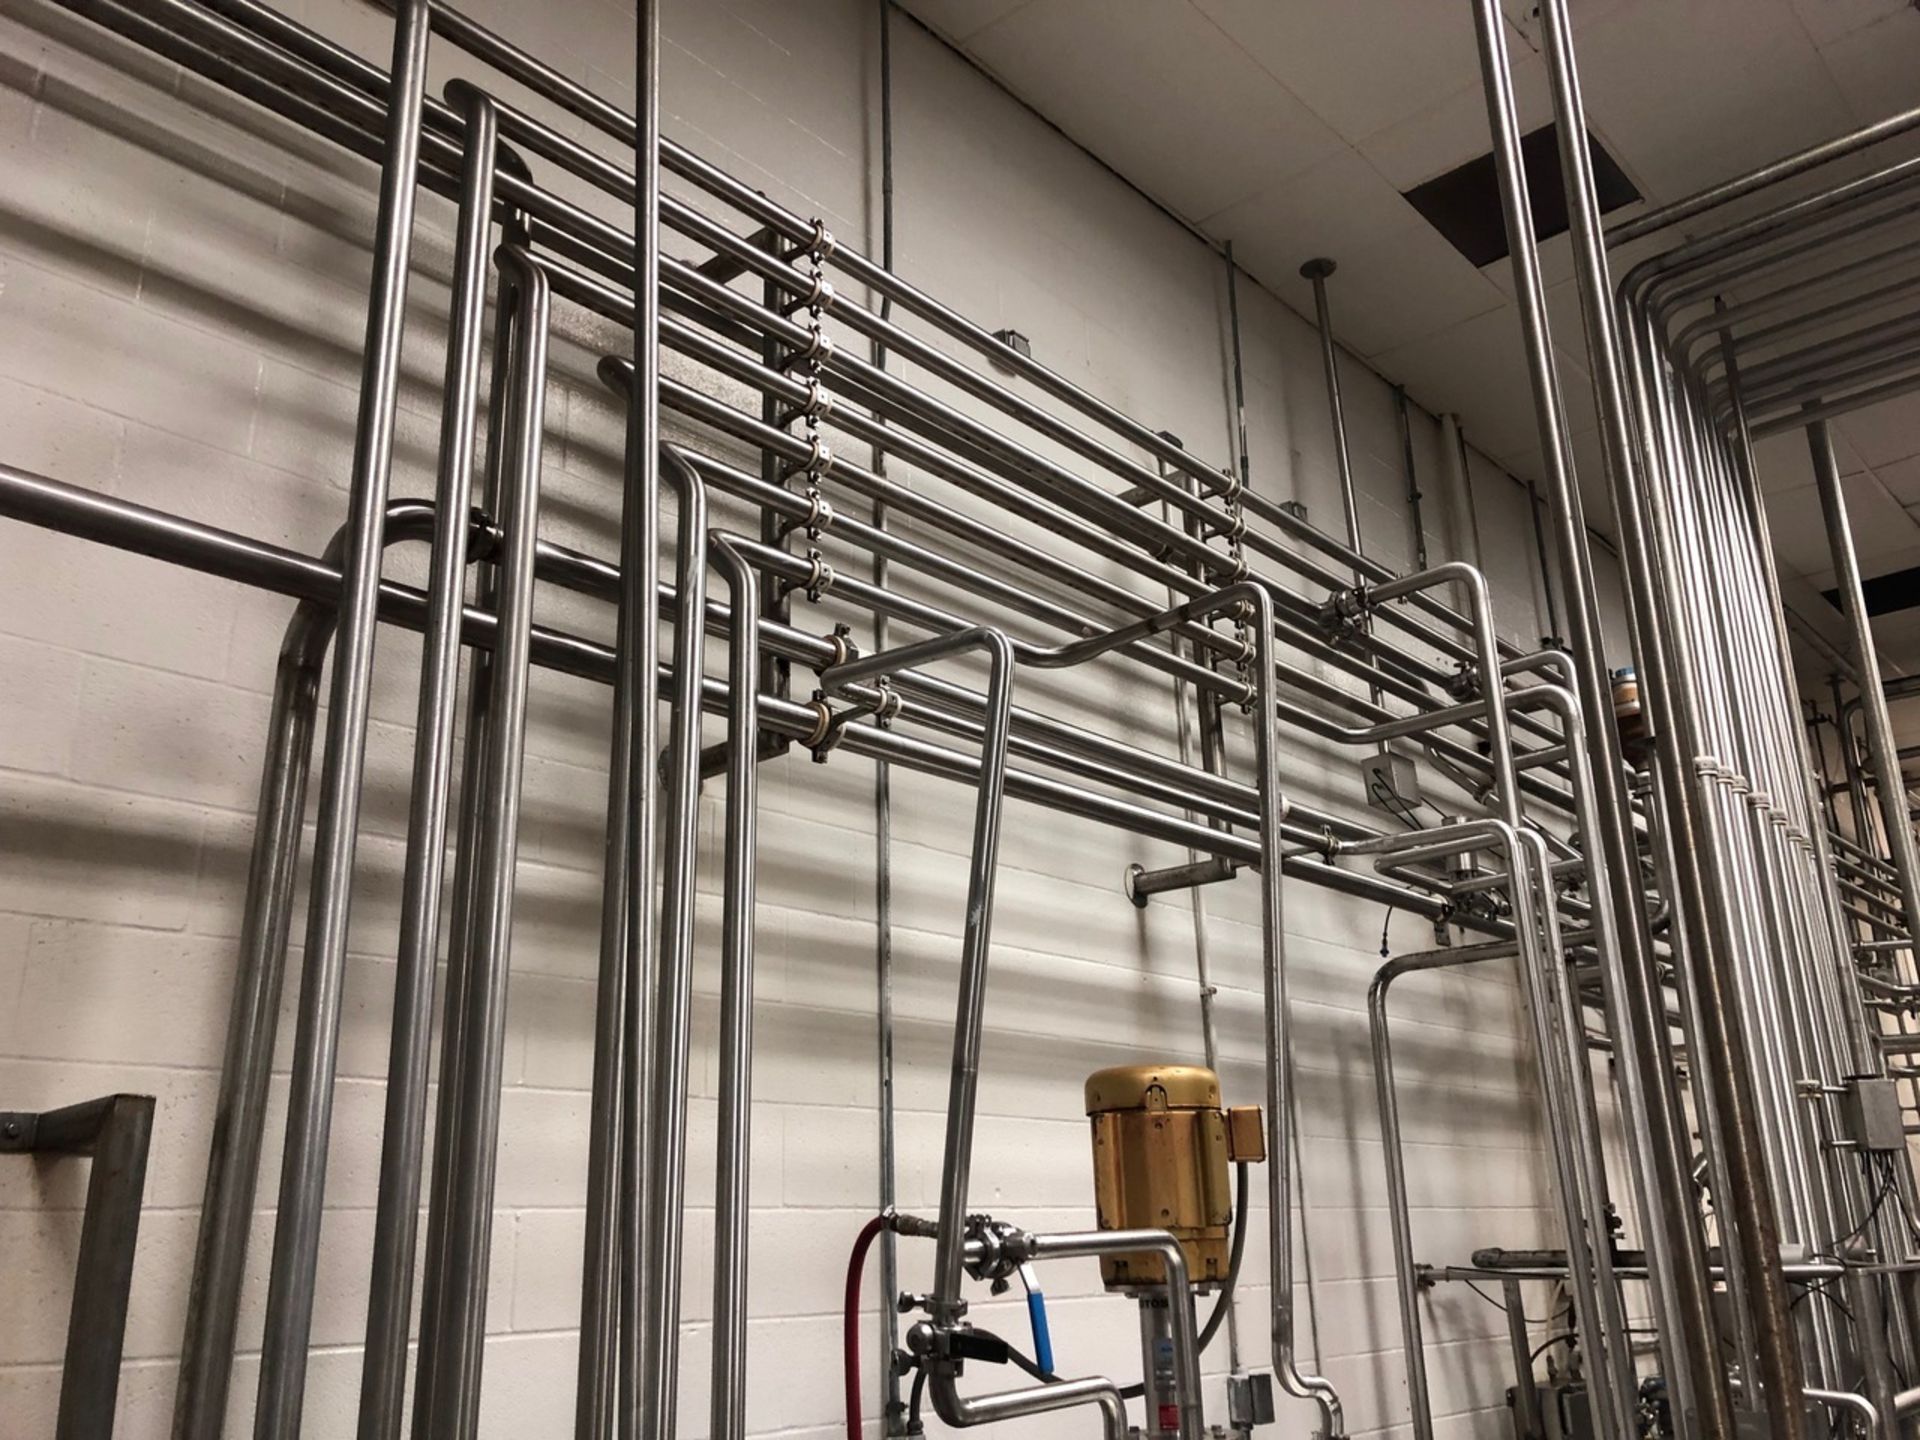 Stainless Steel Piping - Image 2 of 2